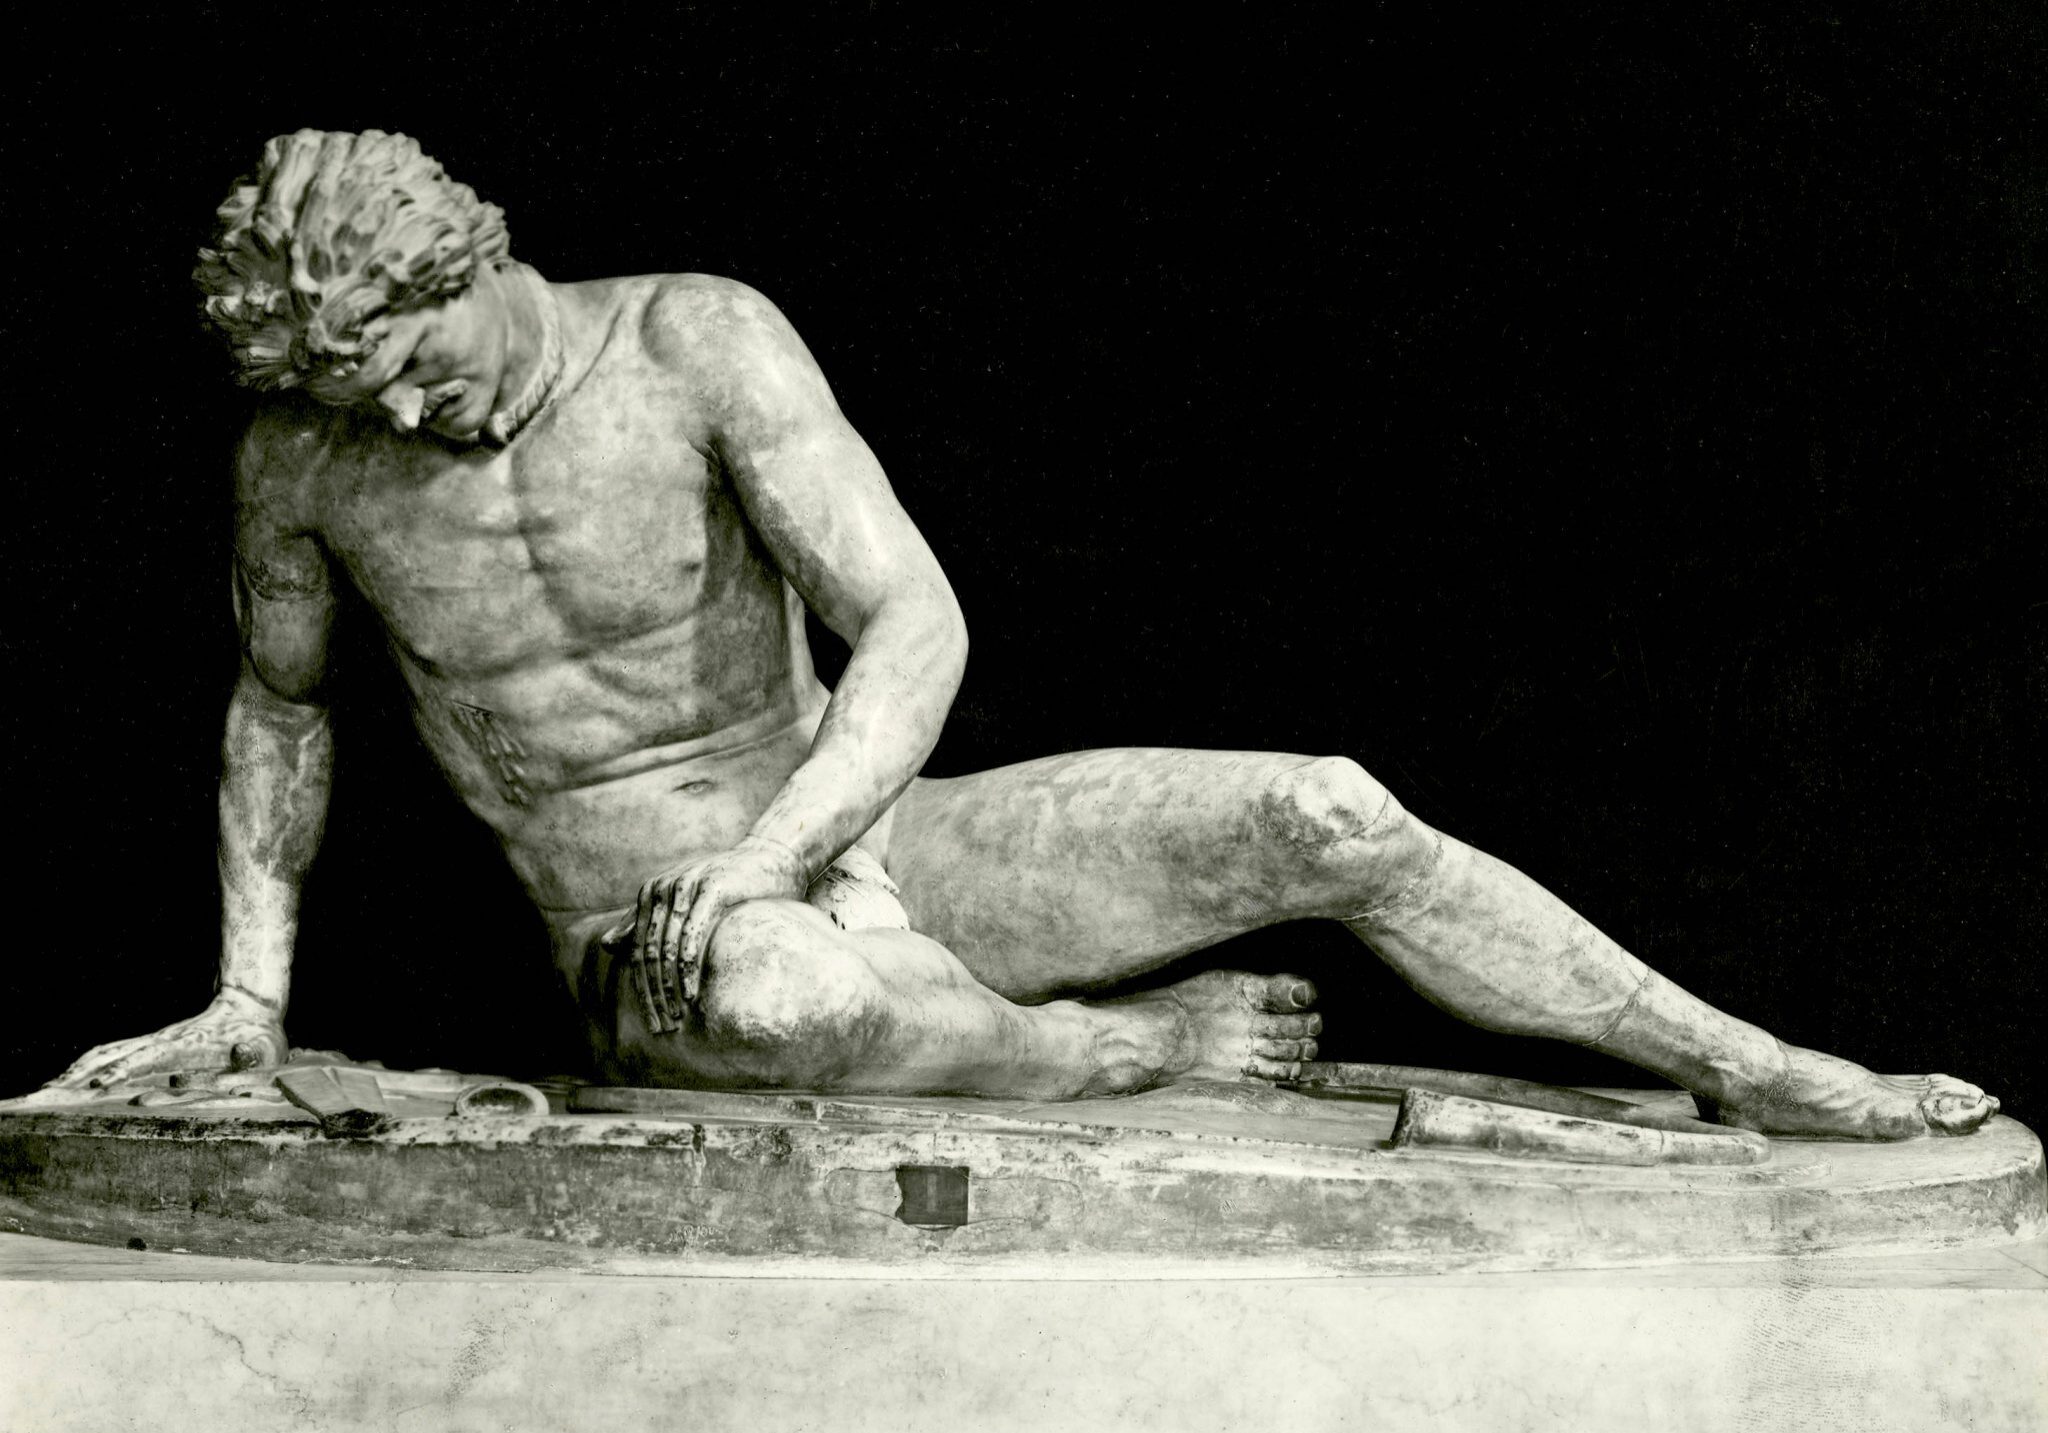 <p><i>The Dying Gaul.</i></p><p>Roman copy after original of 3rd c. BCE.</p><p>Marble. Musei Capitolini, Rome.</p>